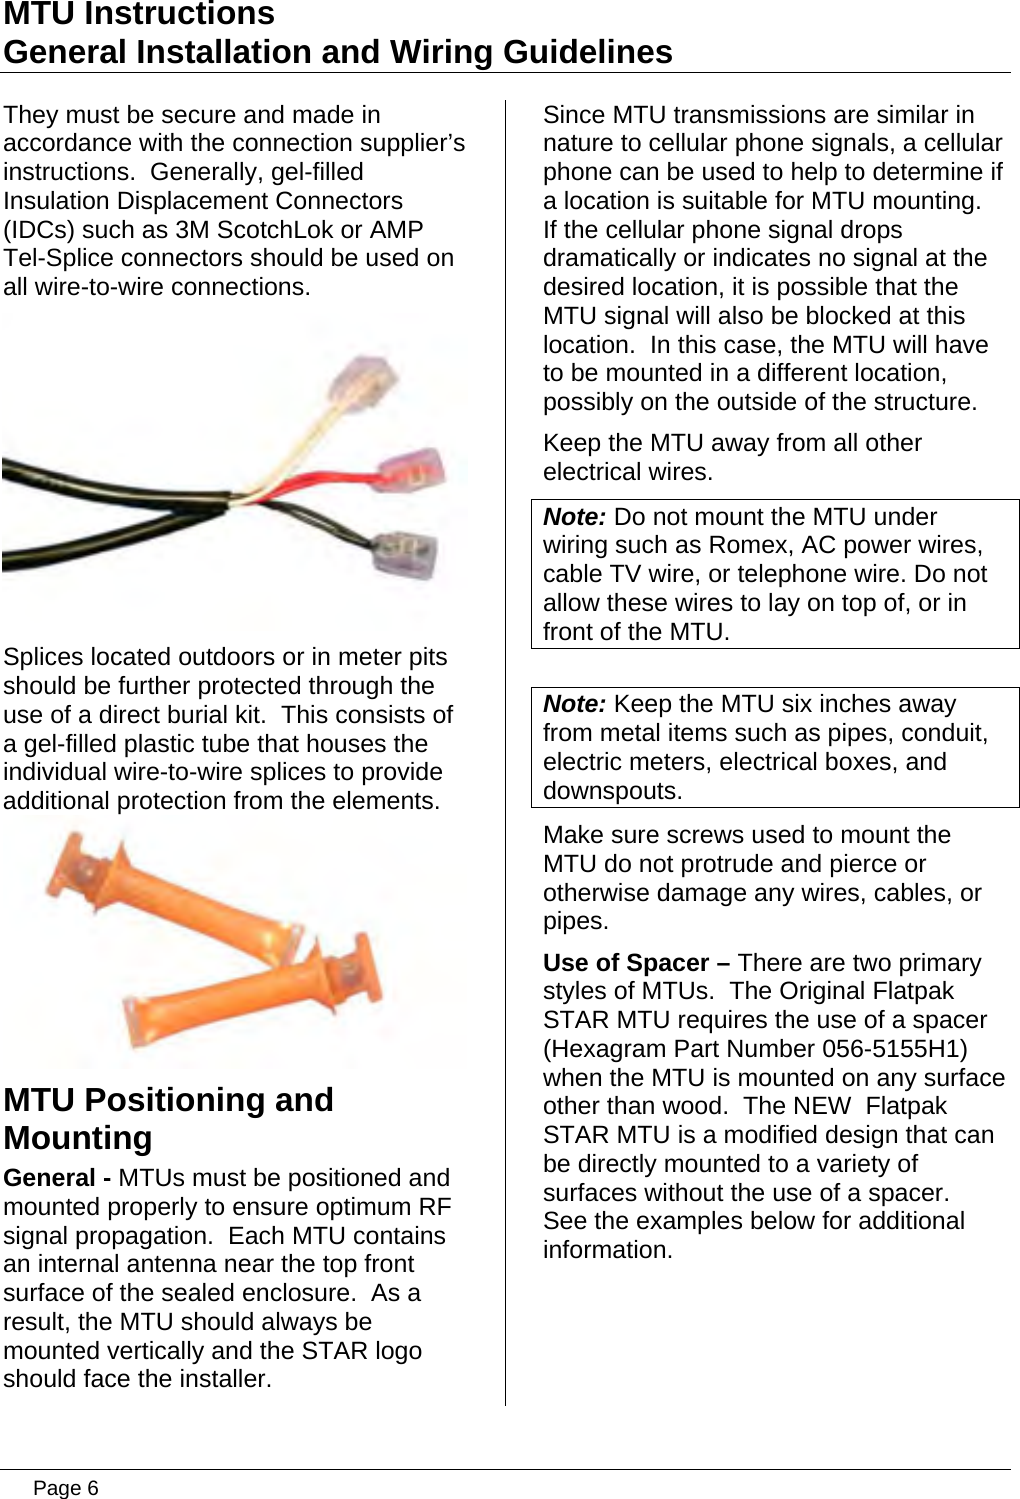 MTU Instructions General Installation and Wiring Guidelines They must be secure and made in accordance with the connection supplier’s instructions.  Generally, gel-filled Insulation Displacement Connectors (IDCs) such as 3M ScotchLok or AMP Tel-Splice connectors should be used on all wire-to-wire connections.  Splices located outdoors or in meter pits should be further protected through the use of a direct burial kit.  This consists of a gel-filled plastic tube that houses the individual wire-to-wire splices to provide additional protection from the elements.  MTU Positioning and Mounting General - MTUs must be positioned and mounted properly to ensure optimum RF signal propagation.  Each MTU contains an internal antenna near the top front surface of the sealed enclosure.  As a result, the MTU should always be mounted vertically and the STAR logo should face the installer. Since MTU transmissions are similar in nature to cellular phone signals, a cellular phone can be used to help to determine if a location is suitable for MTU mounting.  If the cellular phone signal drops dramatically or indicates no signal at the desired location, it is possible that the MTU signal will also be blocked at this location.  In this case, the MTU will have to be mounted in a different location, possibly on the outside of the structure. Keep the MTU away from all other electrical wires.  Note: Do not mount the MTU under wiring such as Romex, AC power wires, cable TV wire, or telephone wire. Do not allow these wires to lay on top of, or in front of the MTU.  Note: Keep the MTU six inches away from metal items such as pipes, conduit, electric meters, electrical boxes, and downspouts. Make sure screws used to mount the MTU do not protrude and pierce or otherwise damage any wires, cables, or pipes.  Use of Spacer – There are two primary styles of MTUs.  The Original Flatpak STAR MTU requires the use of a spacer (Hexagram Part Number 056-5155H1) when the MTU is mounted on any surface other than wood.  The NEW  Flatpak STAR MTU is a modified design that can be directly mounted to a variety of surfaces without the use of a spacer.  See the examples below for additional information.   Page 6